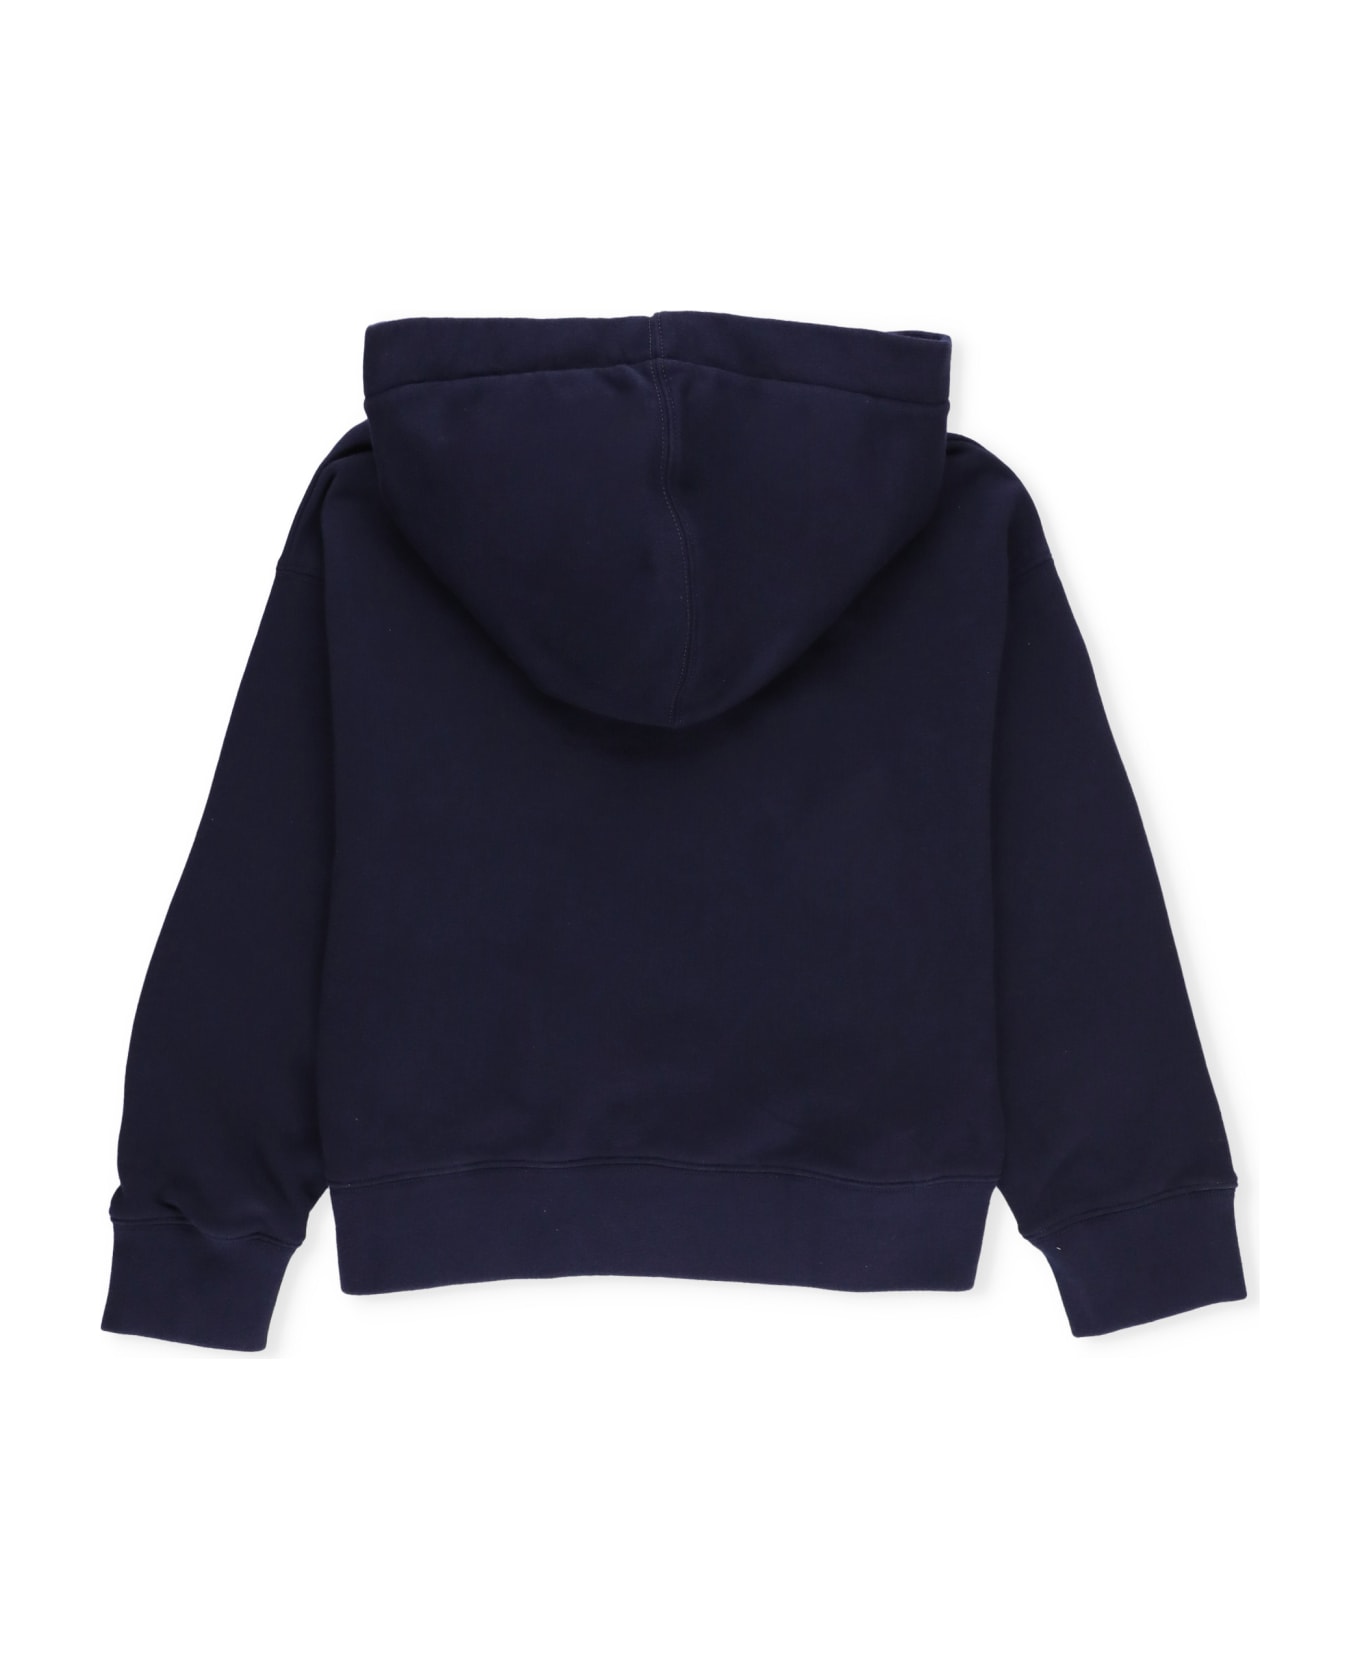 Palm Angels Cotton Hoodie - NAVY